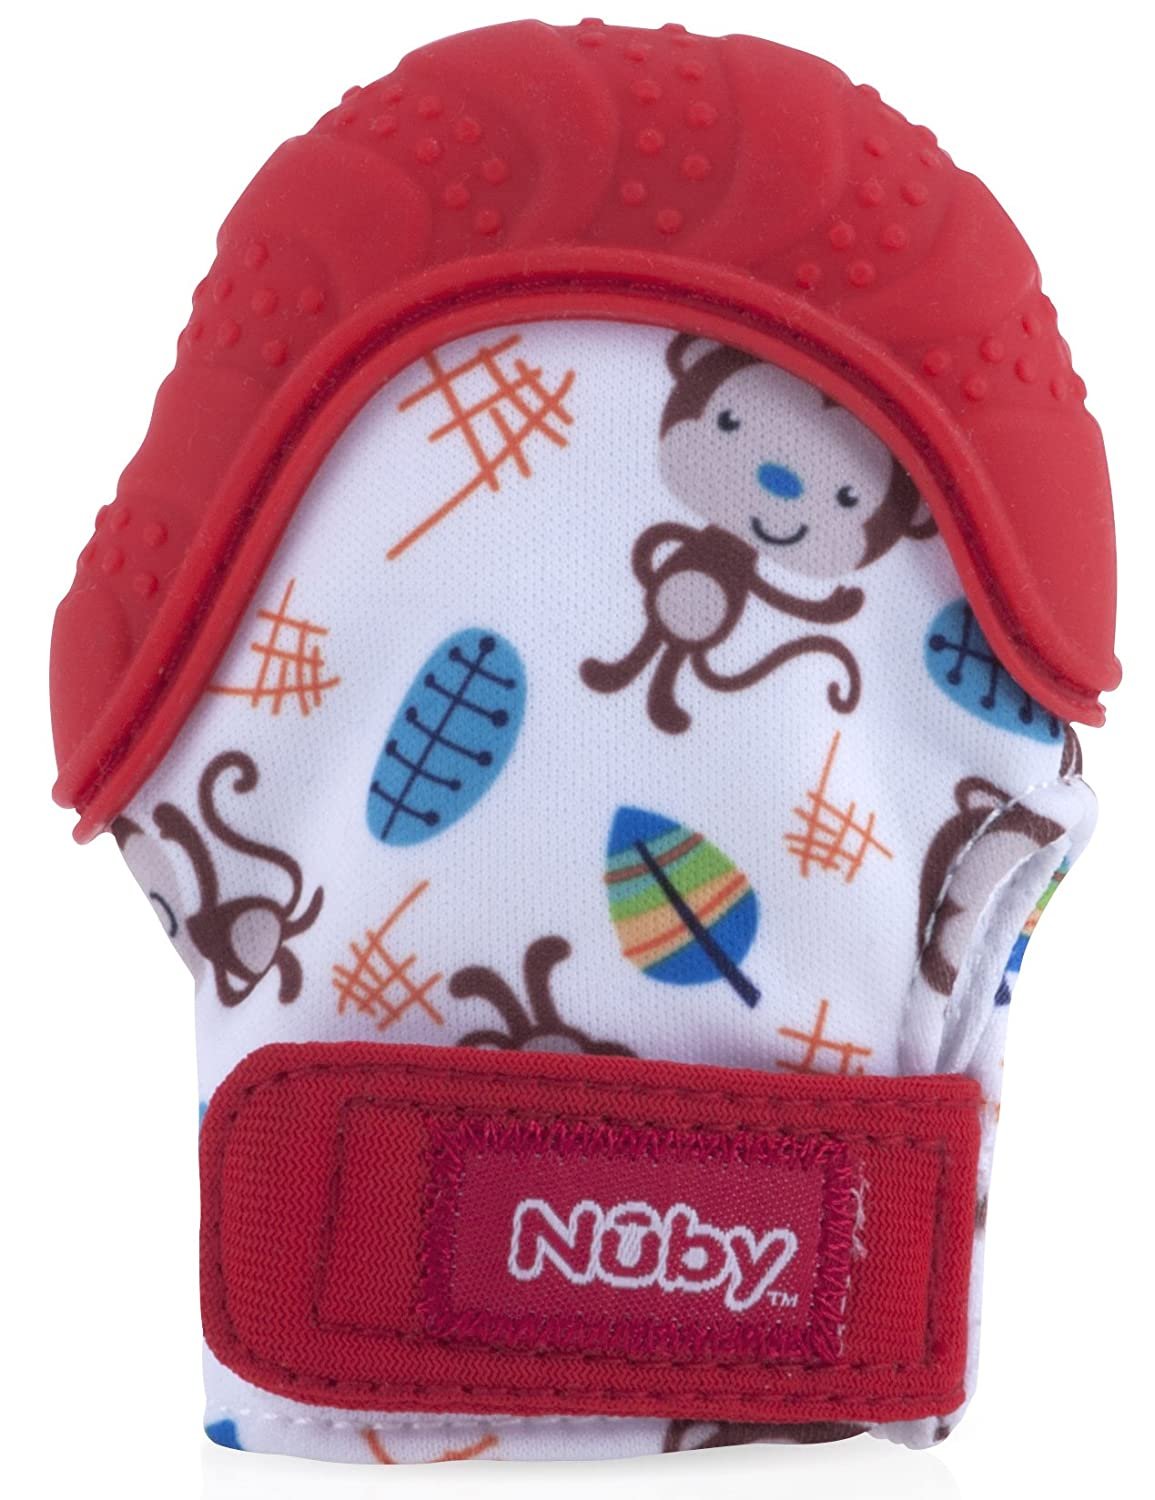 Nuby Soothing Teething Mitten with Hygienic Travel Bag, Red Monkey, 1 Count